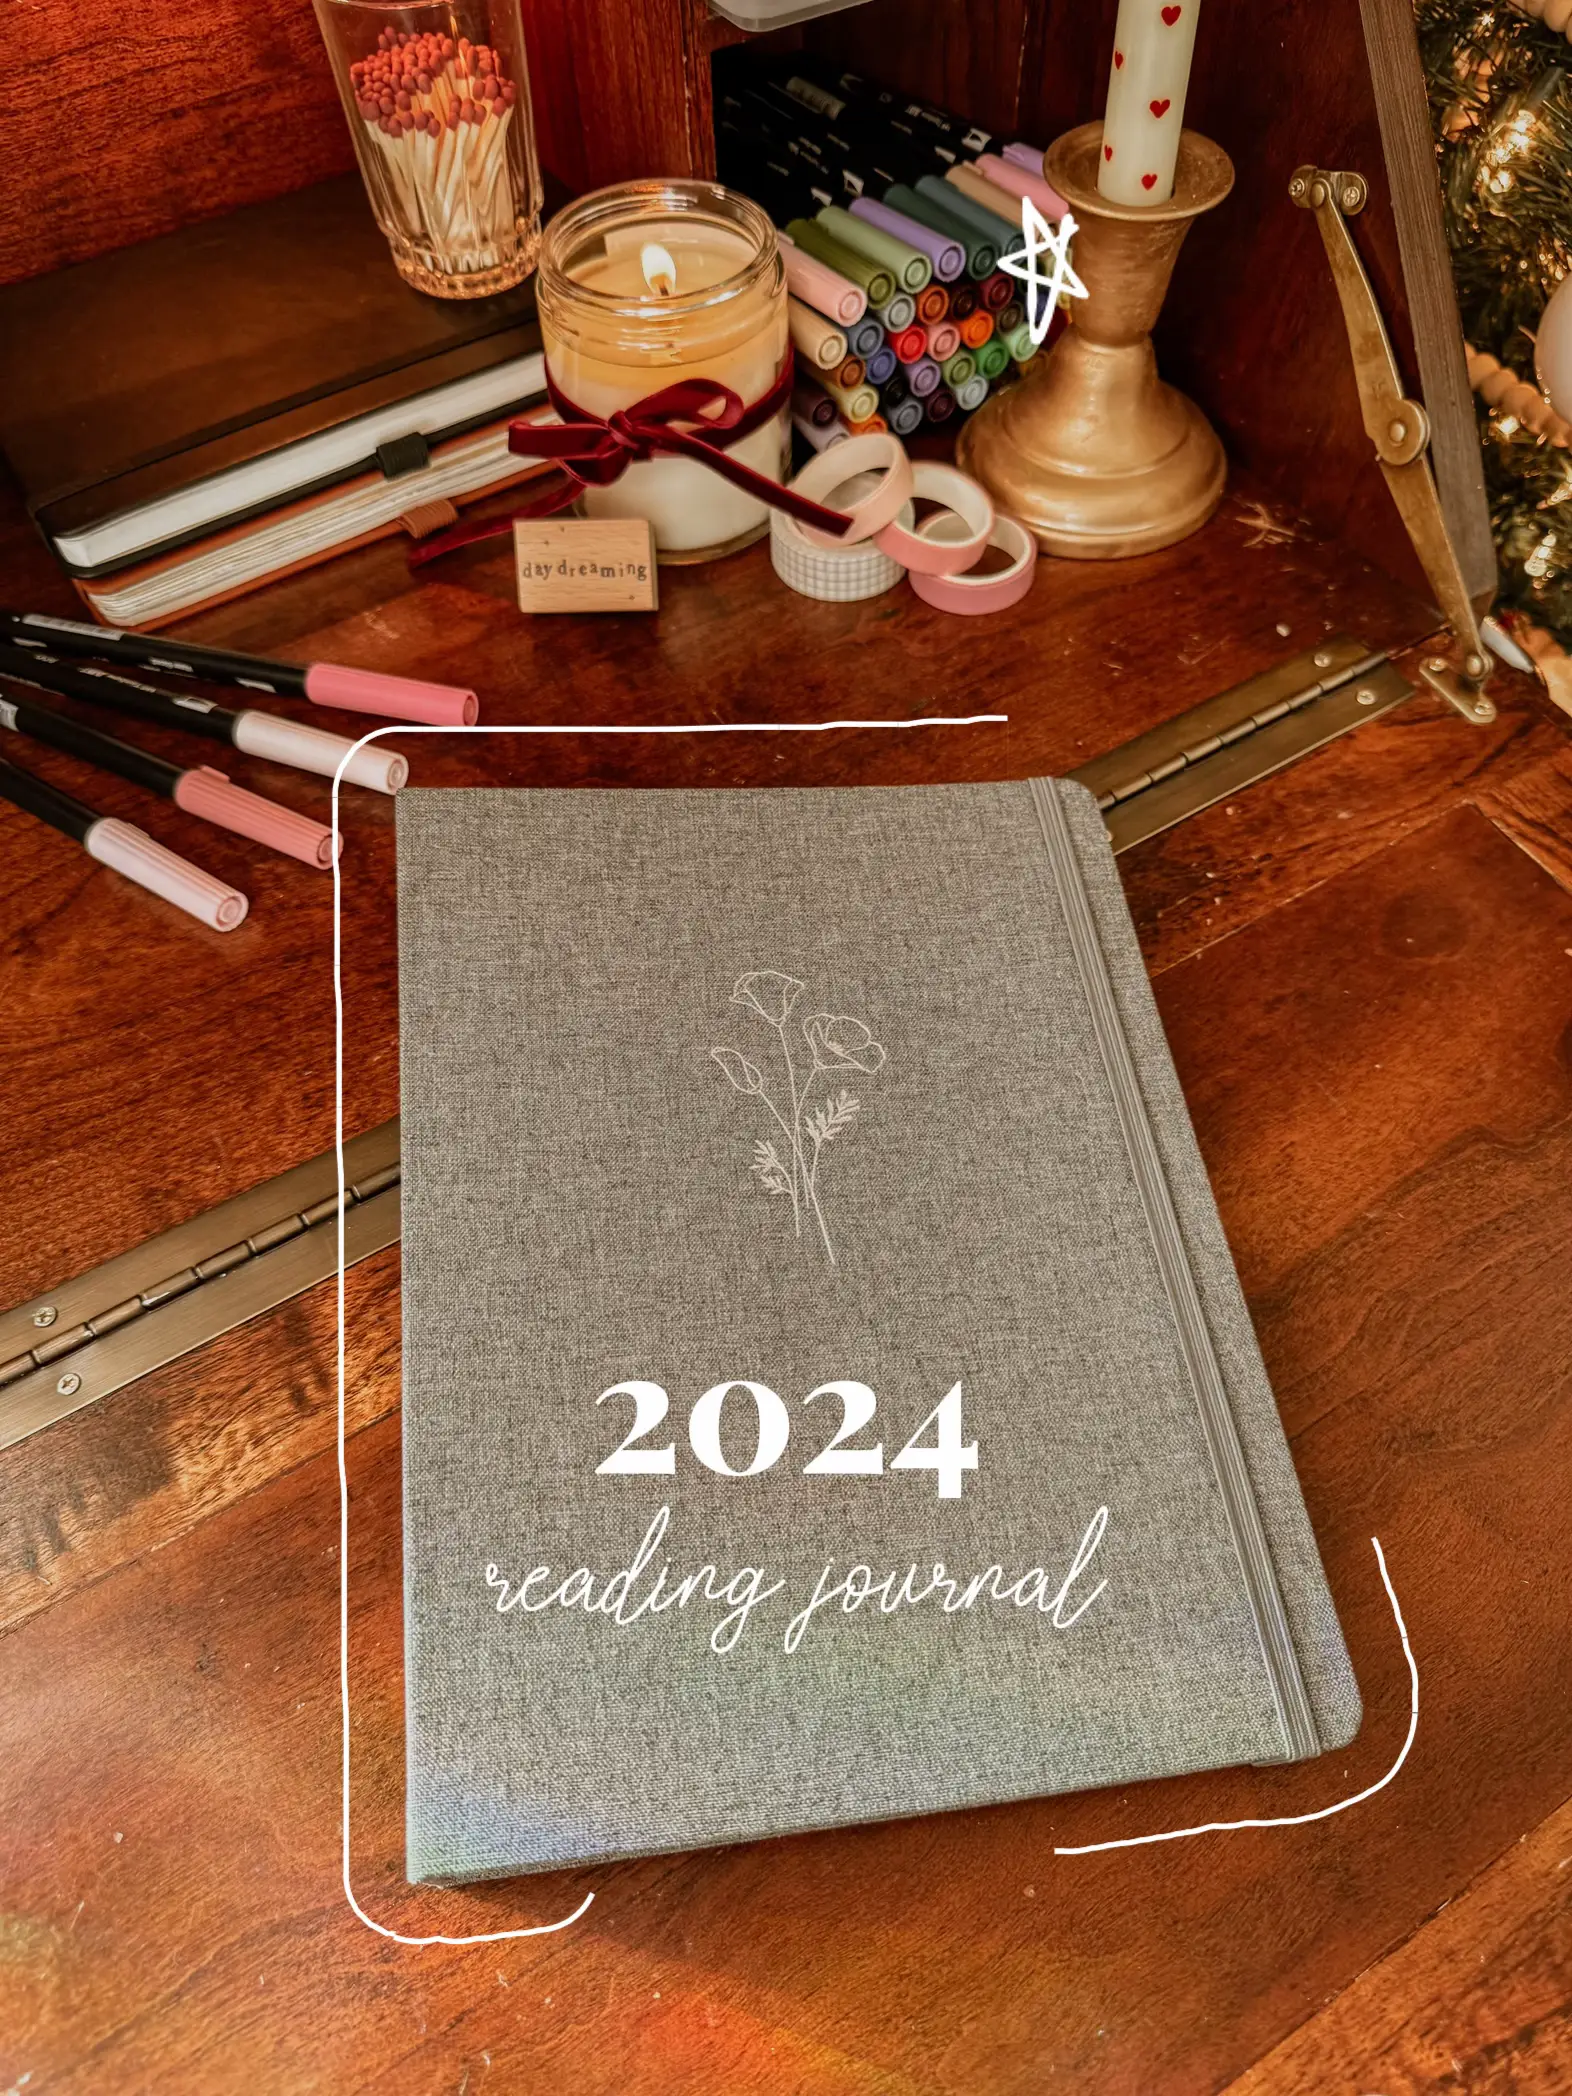 BOOK READING JOURNAL 2024